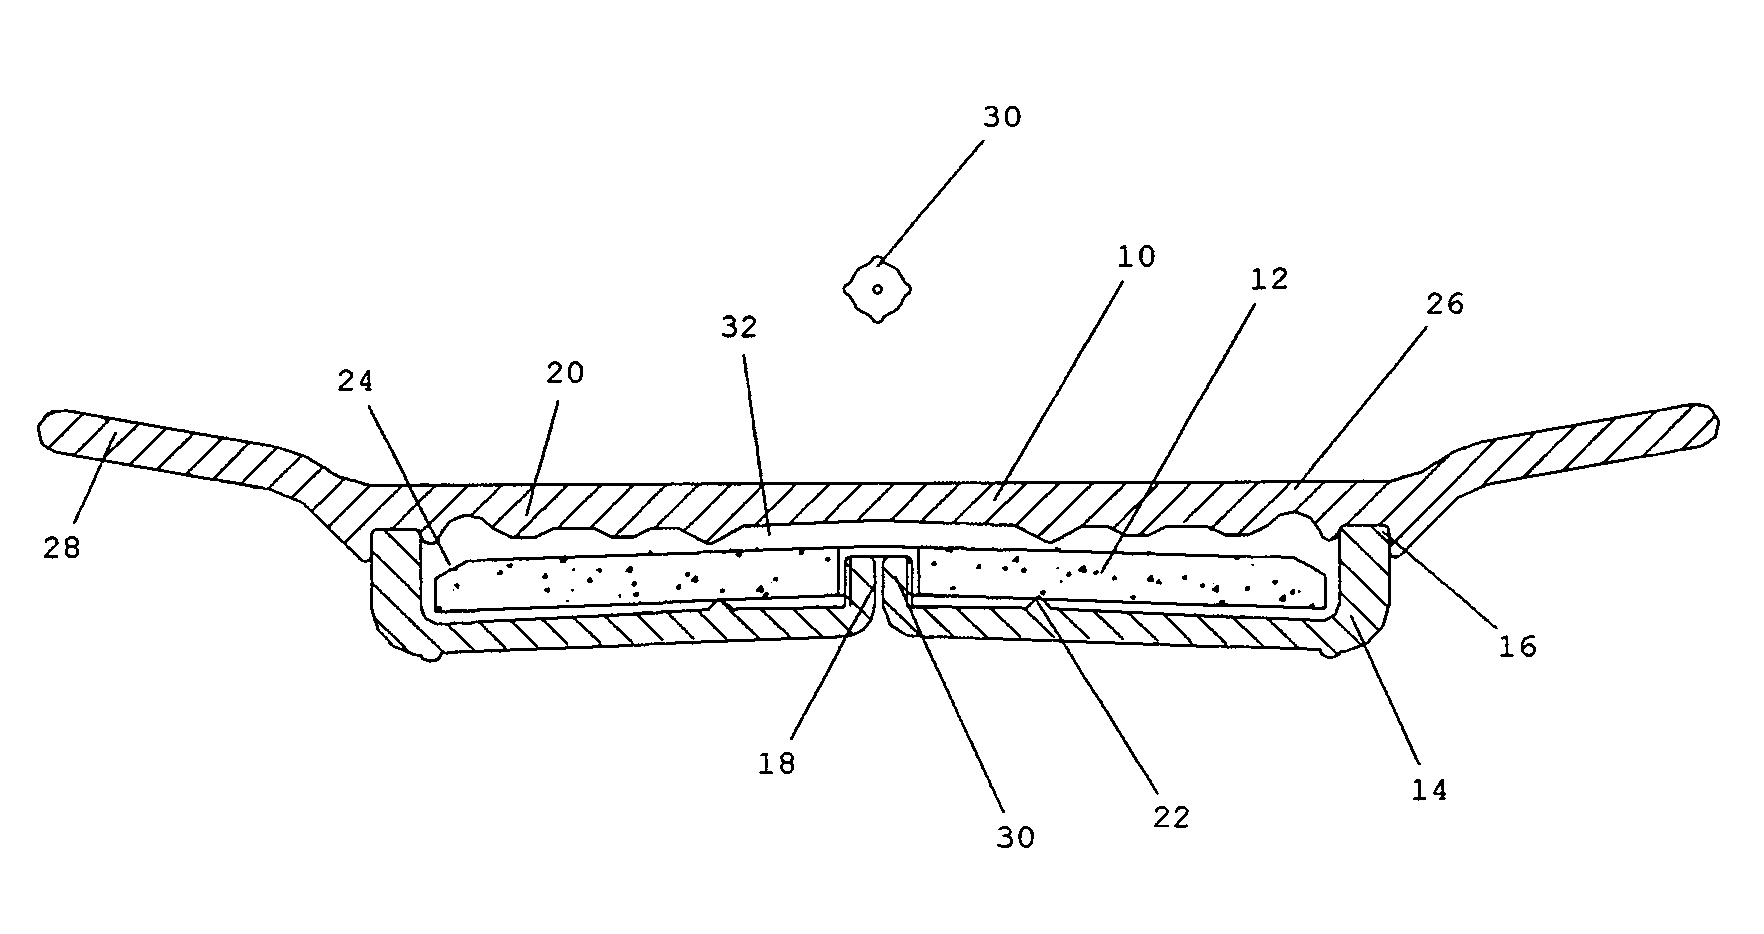 Integrated microwaveable heat storage device